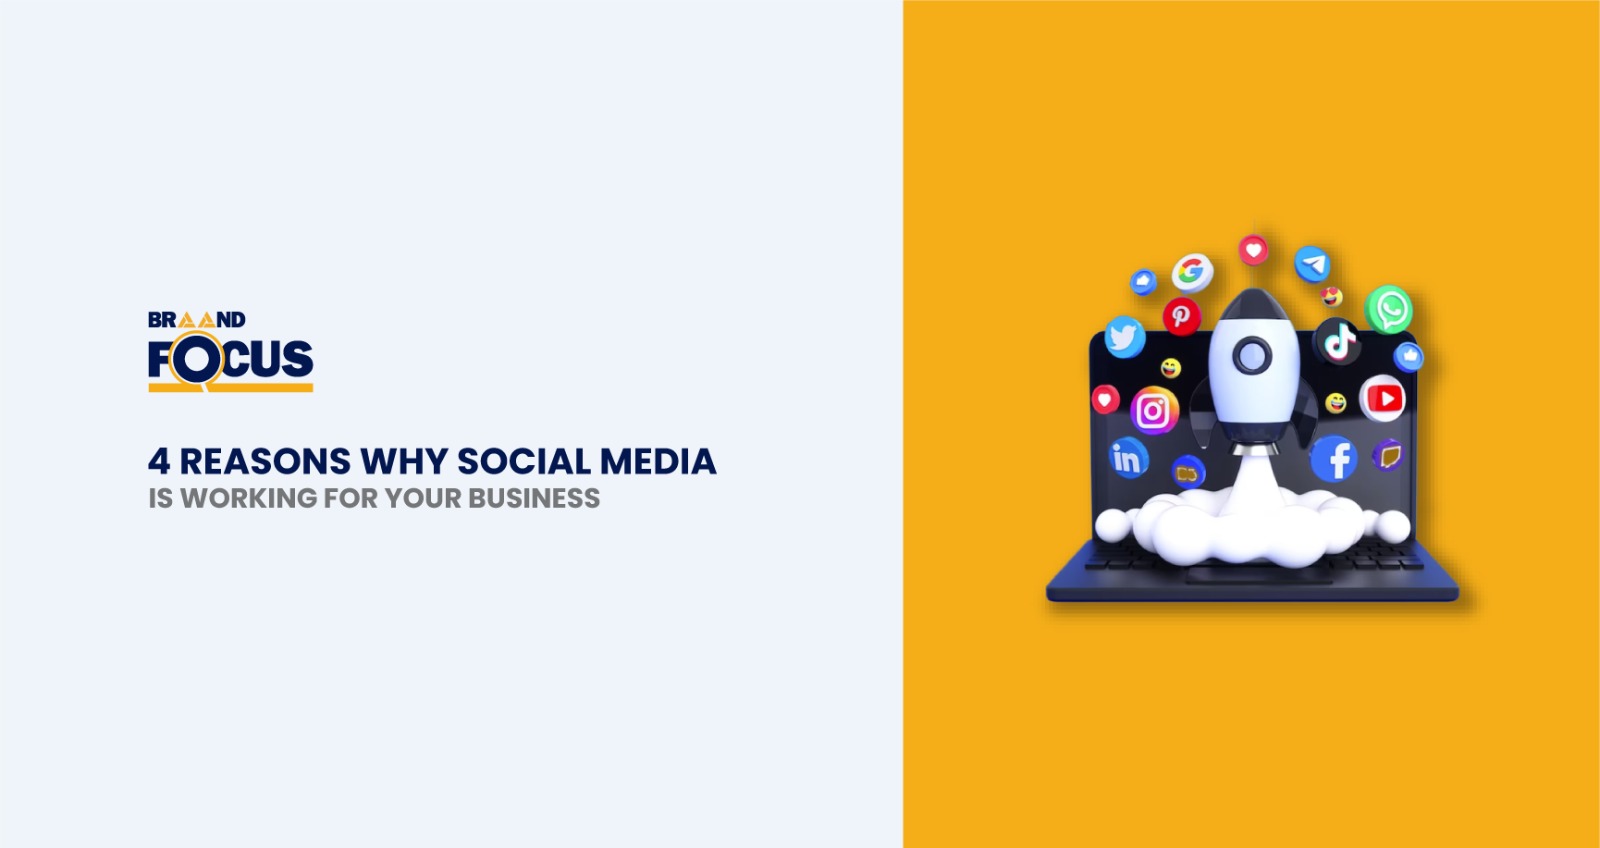 Four reasons why social media benefits your business: increased brand awareness, direct customer engagement, targeted advertising, and improved customer loyalty.